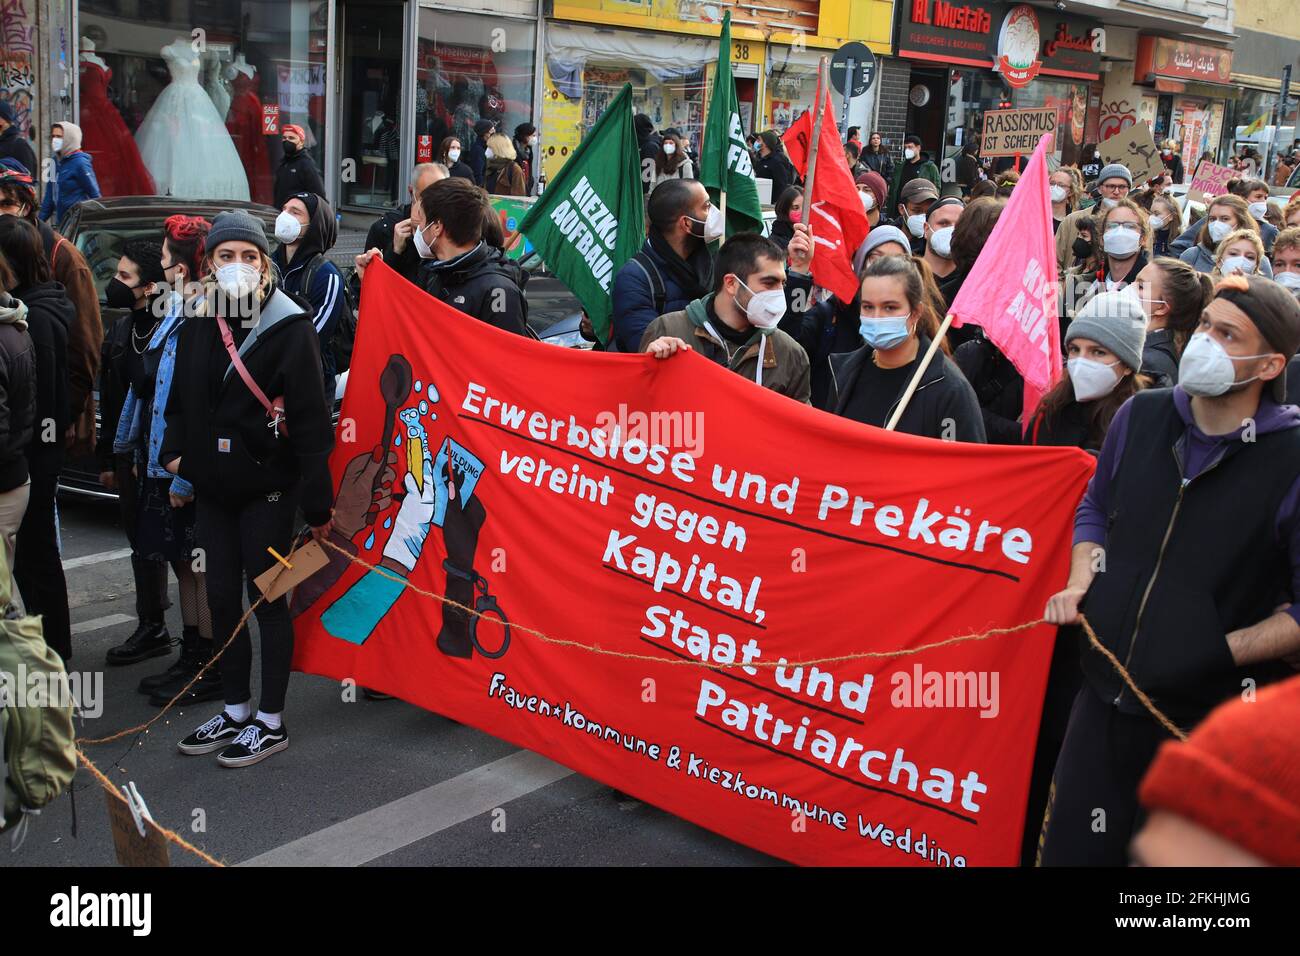 Berlin, Germany - May 01, 2021: Protesters holding a banner with the slogan ' Unemployed and precarious united against capital, state and patriarchy' Stock Photo